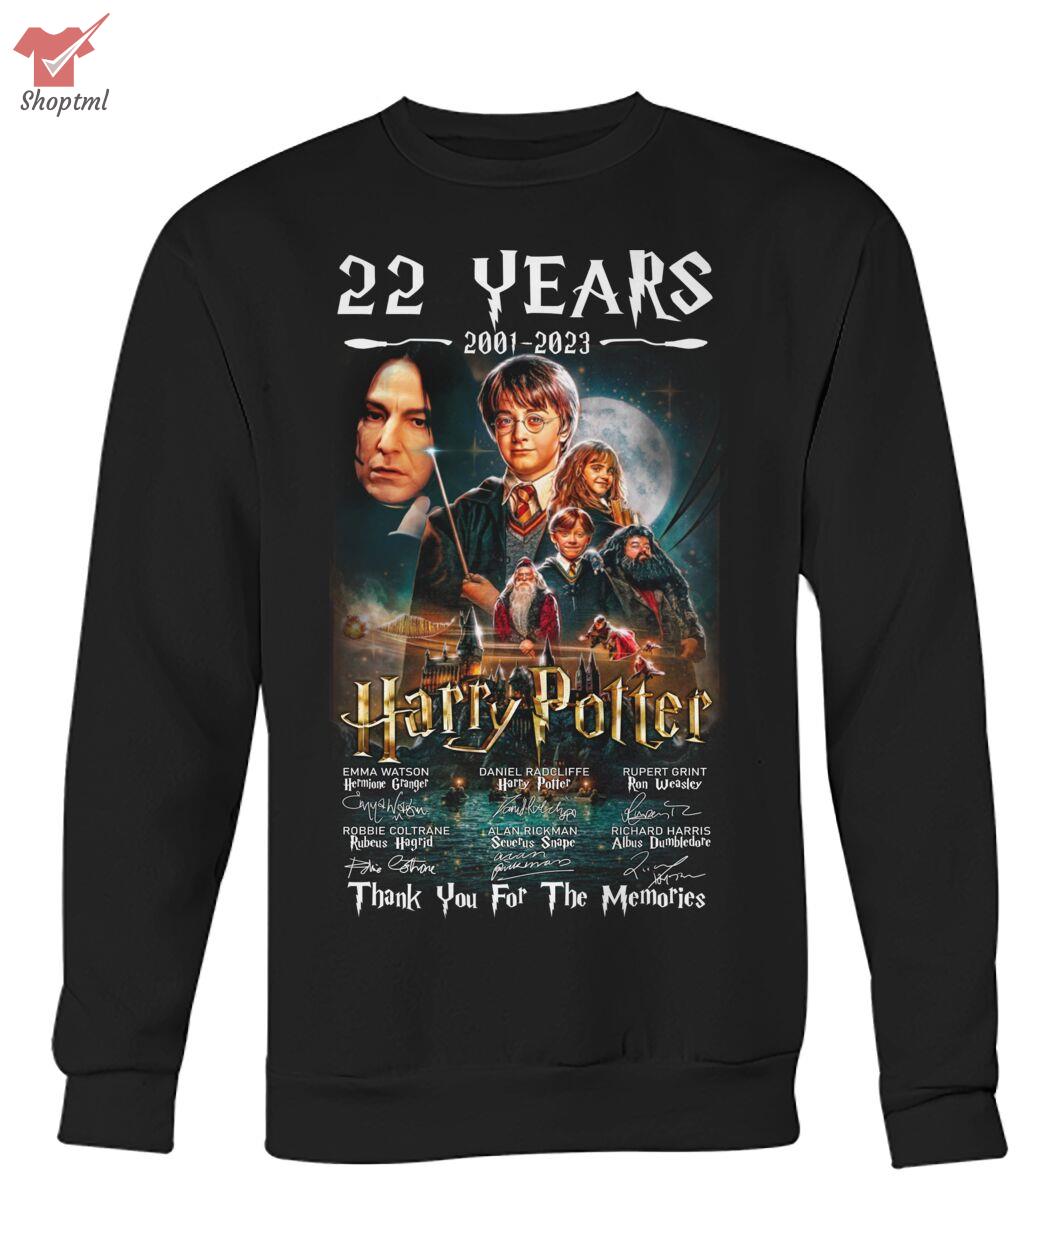 Harry Potter 22 Years 2001 2023 Thank You For The Memories Signature Shirt Hoodie